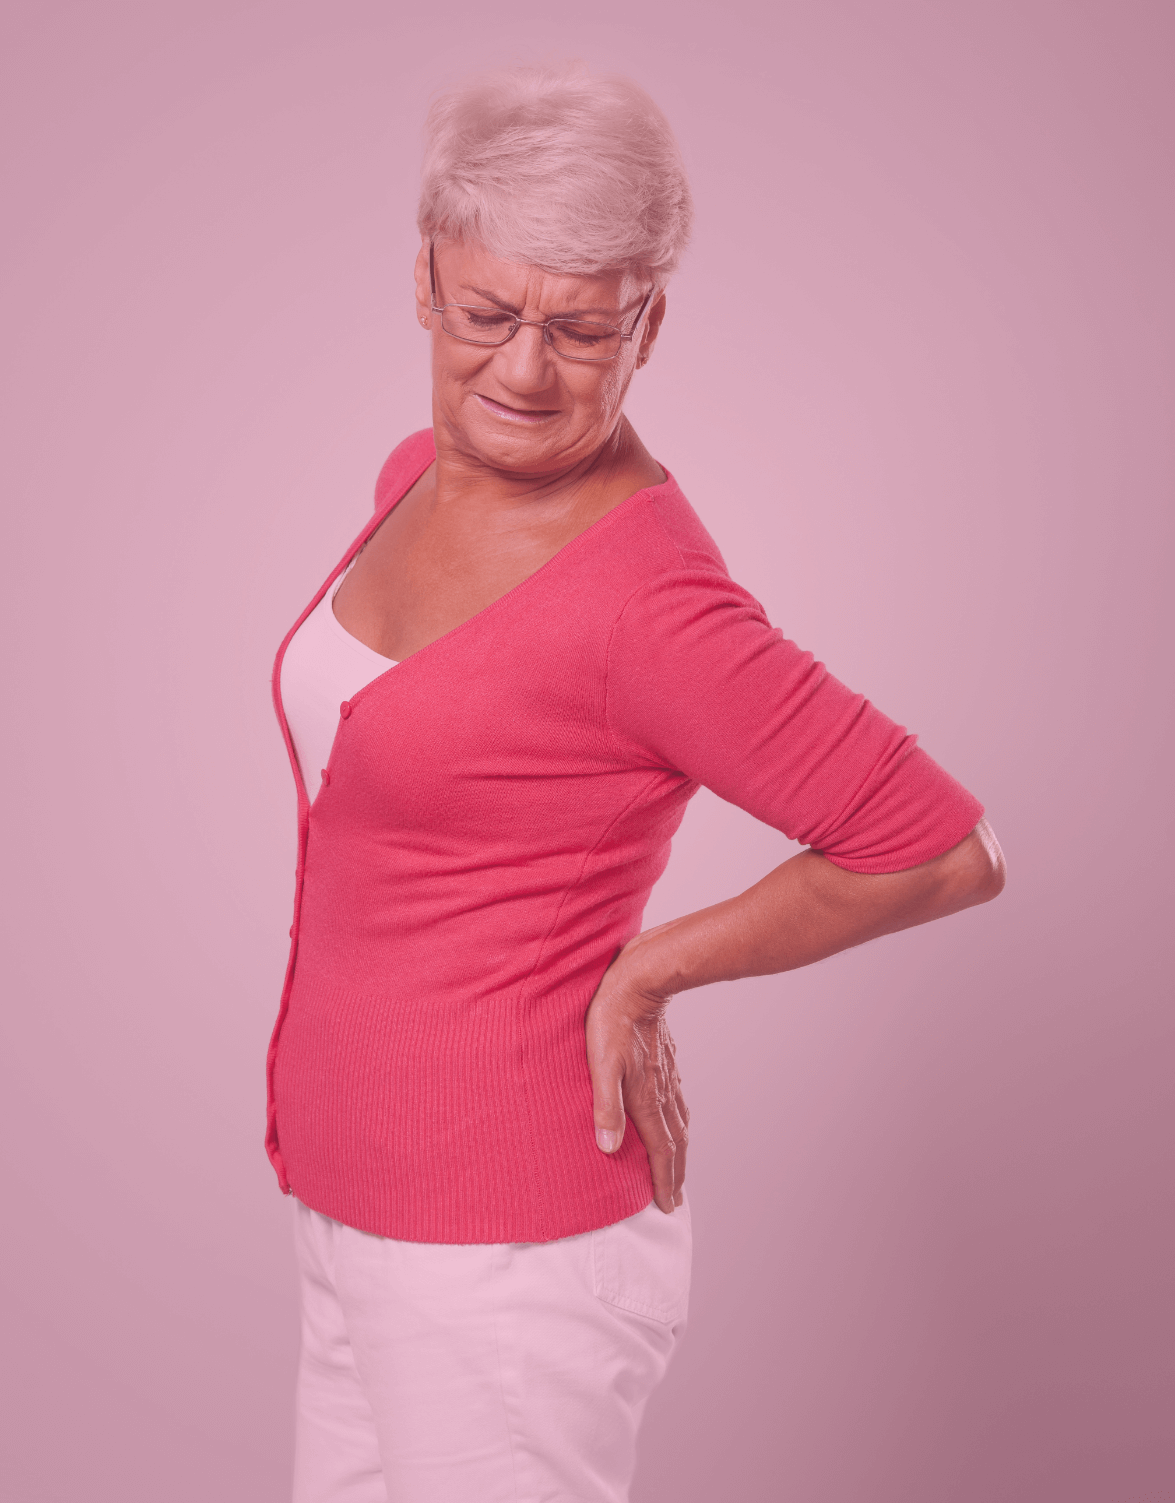 Menopause and Osteoporosis | Northside Gynaecology